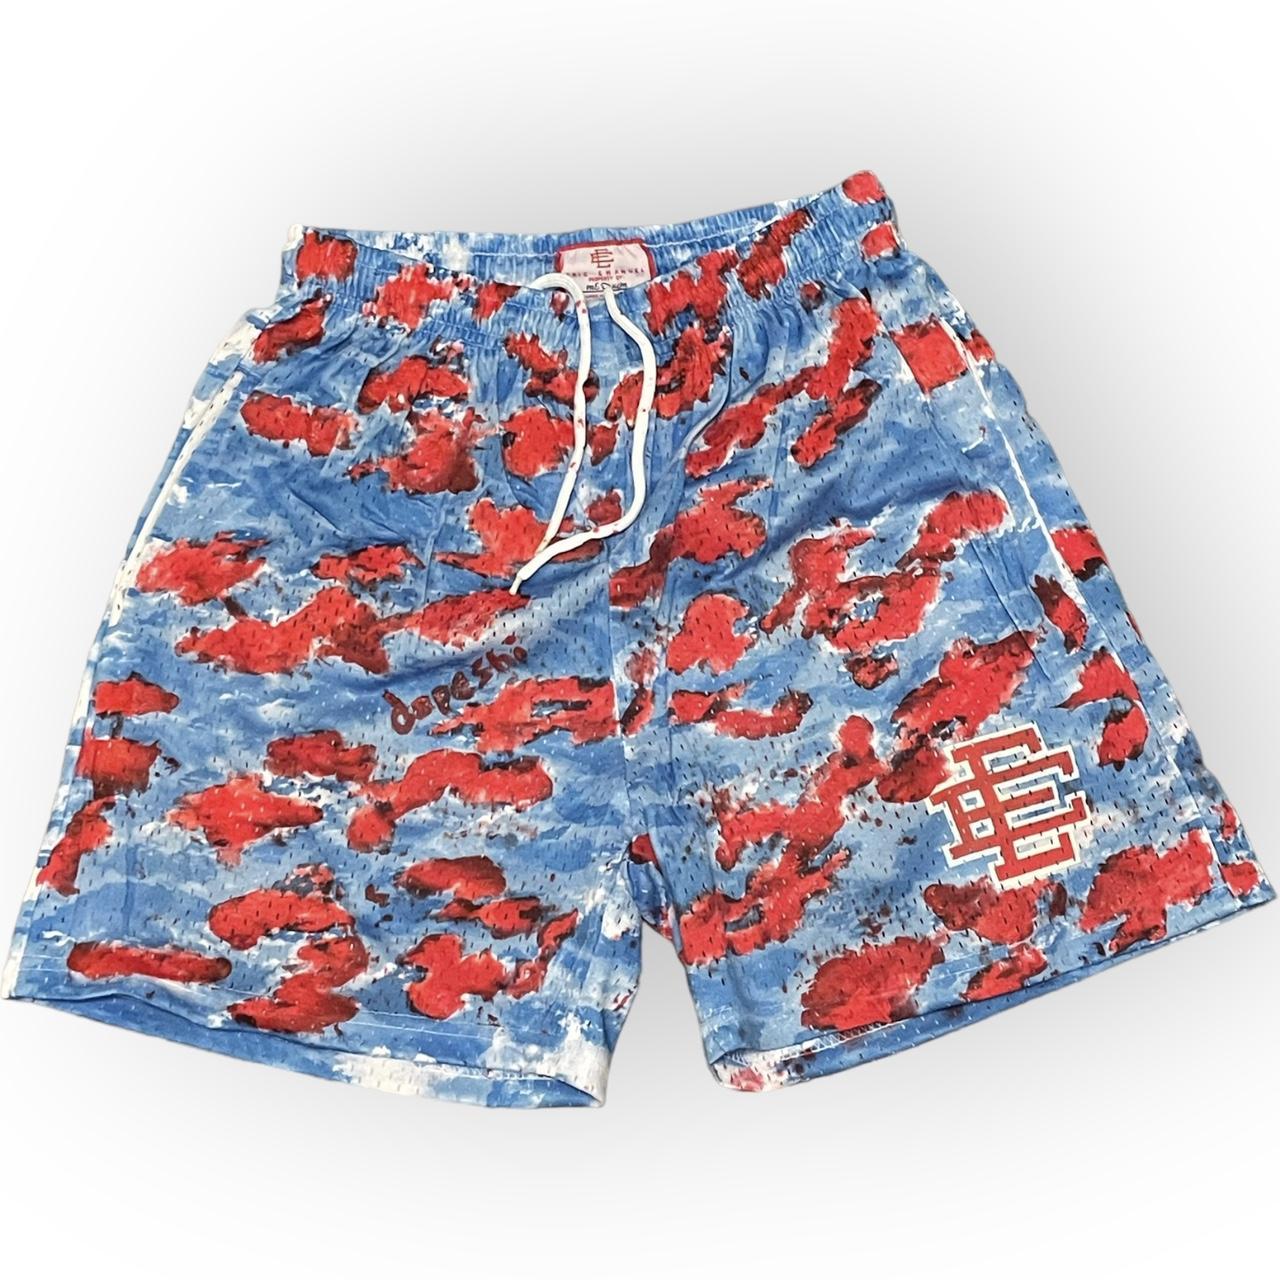 Men's Blue and Red Shorts | Depop